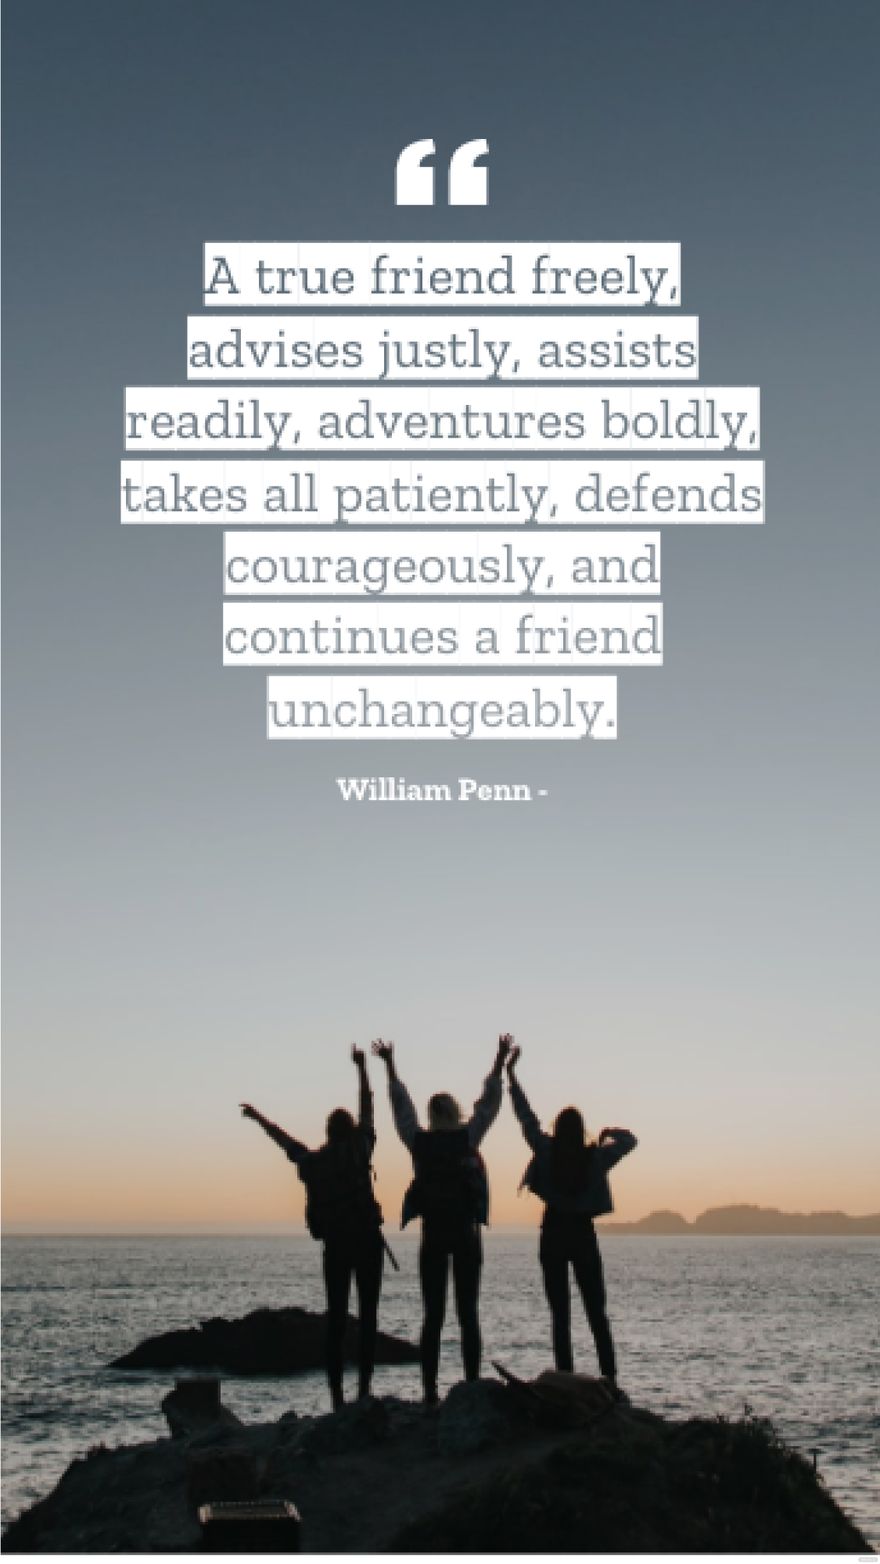 William Penn - A true friend freely, advises justly, assists readily, adventures boldly, takes all patiently, defends courageously, and continues a friend unchangeably.